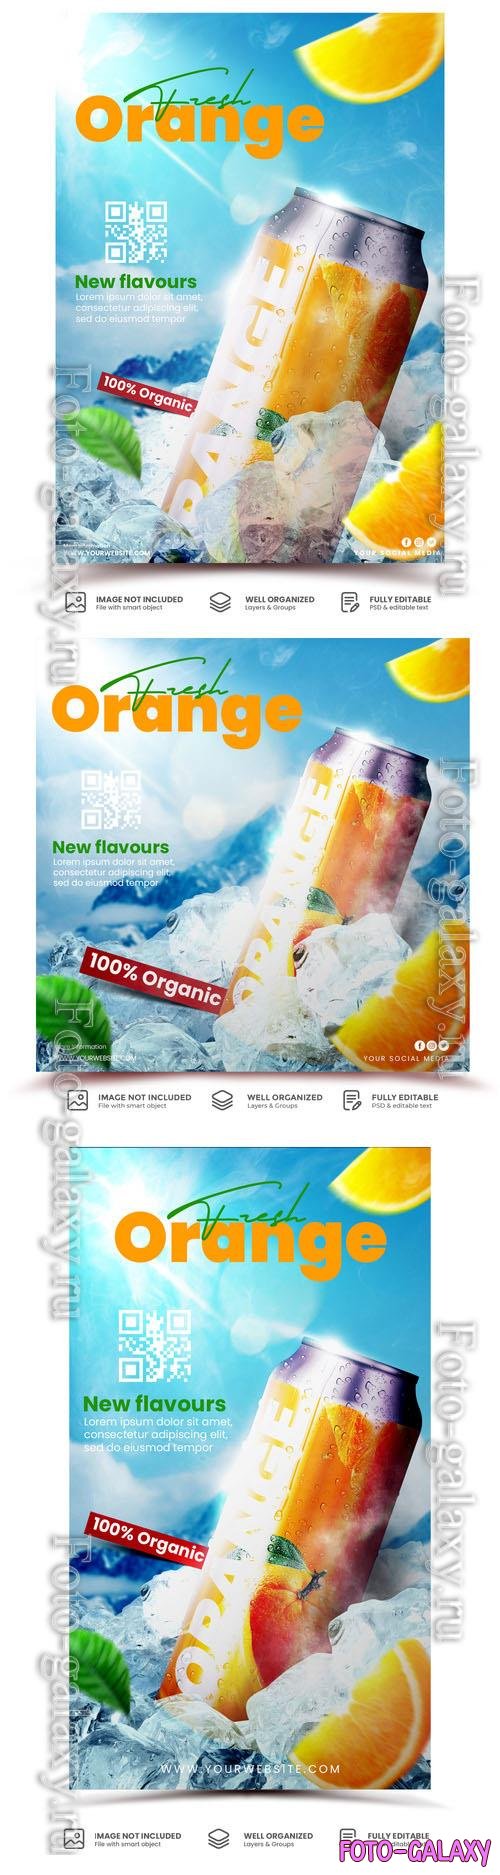 Fresh and natural organic orange juice promotion flyer template